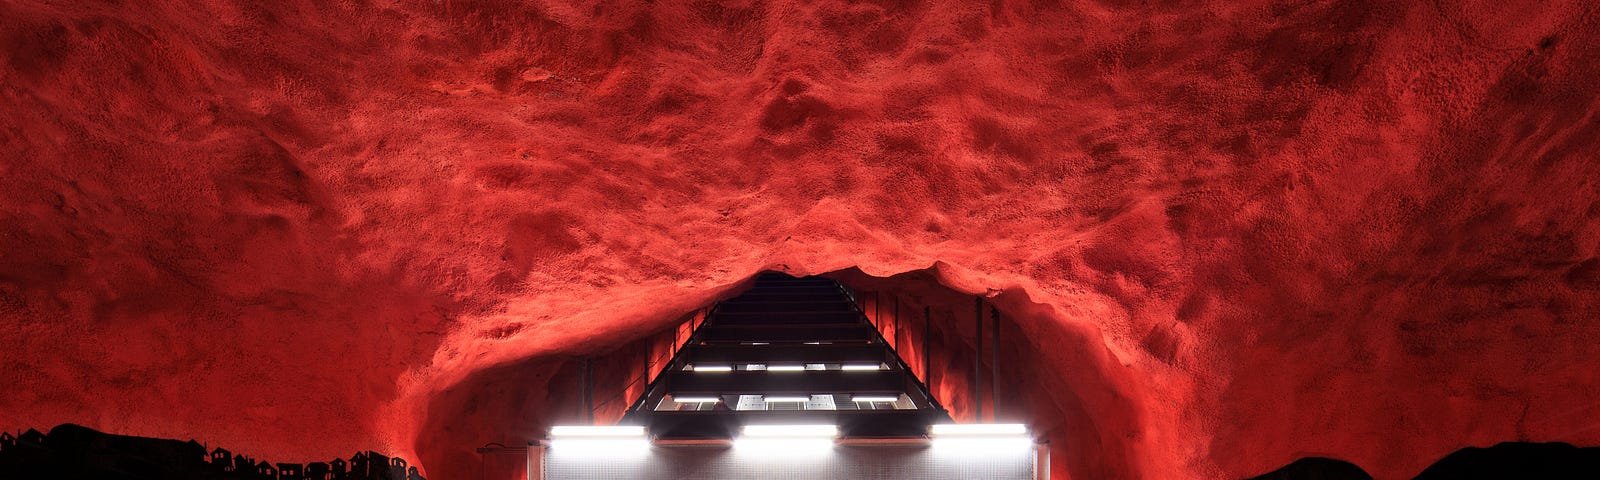 4 sets of escalators in a darkened tunnel leading up out of the transit hub surrounded by figurative red clouds swallowing the periphery of it all. A metaphysical way of viewing whether NFTs are right for you.